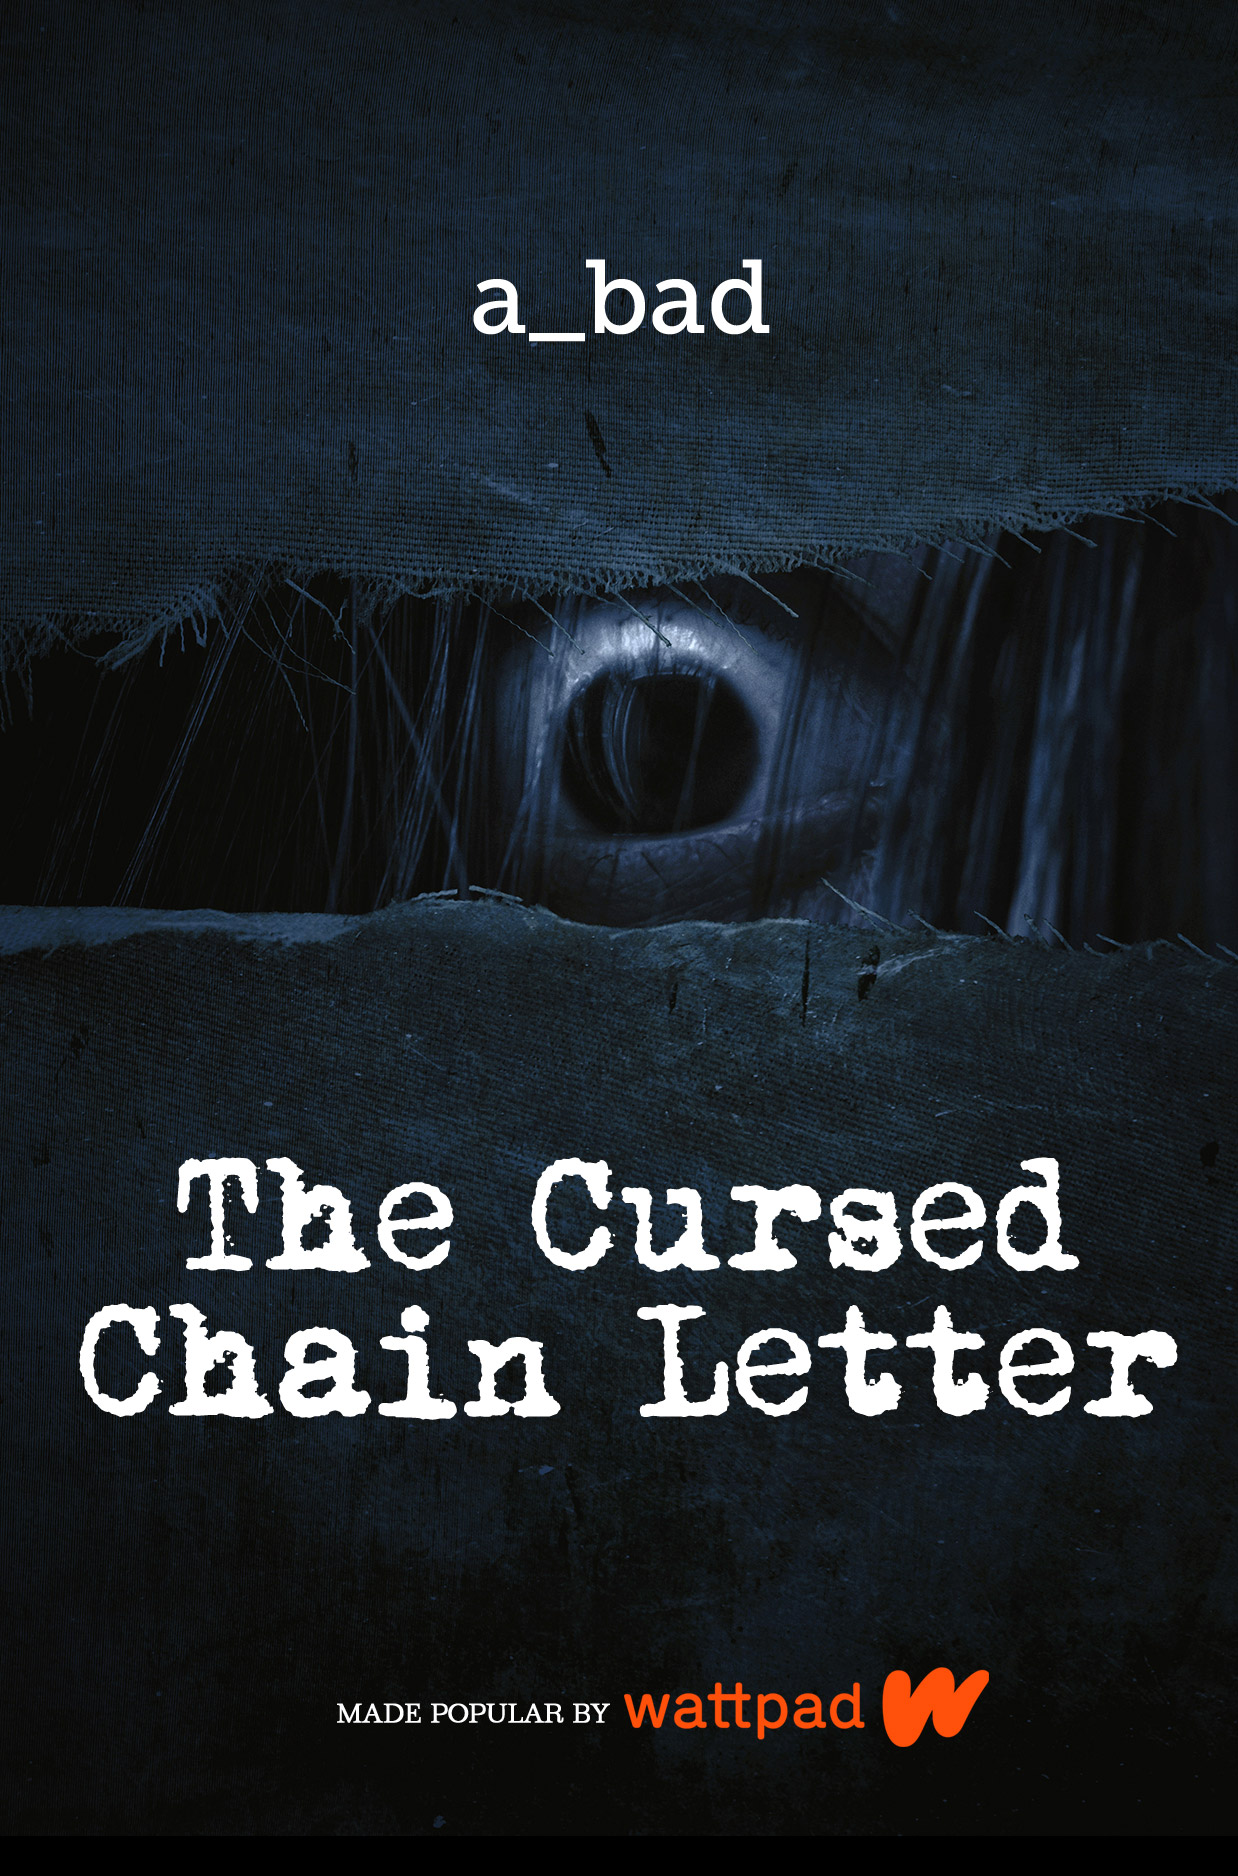 The Cursed Chain Letter